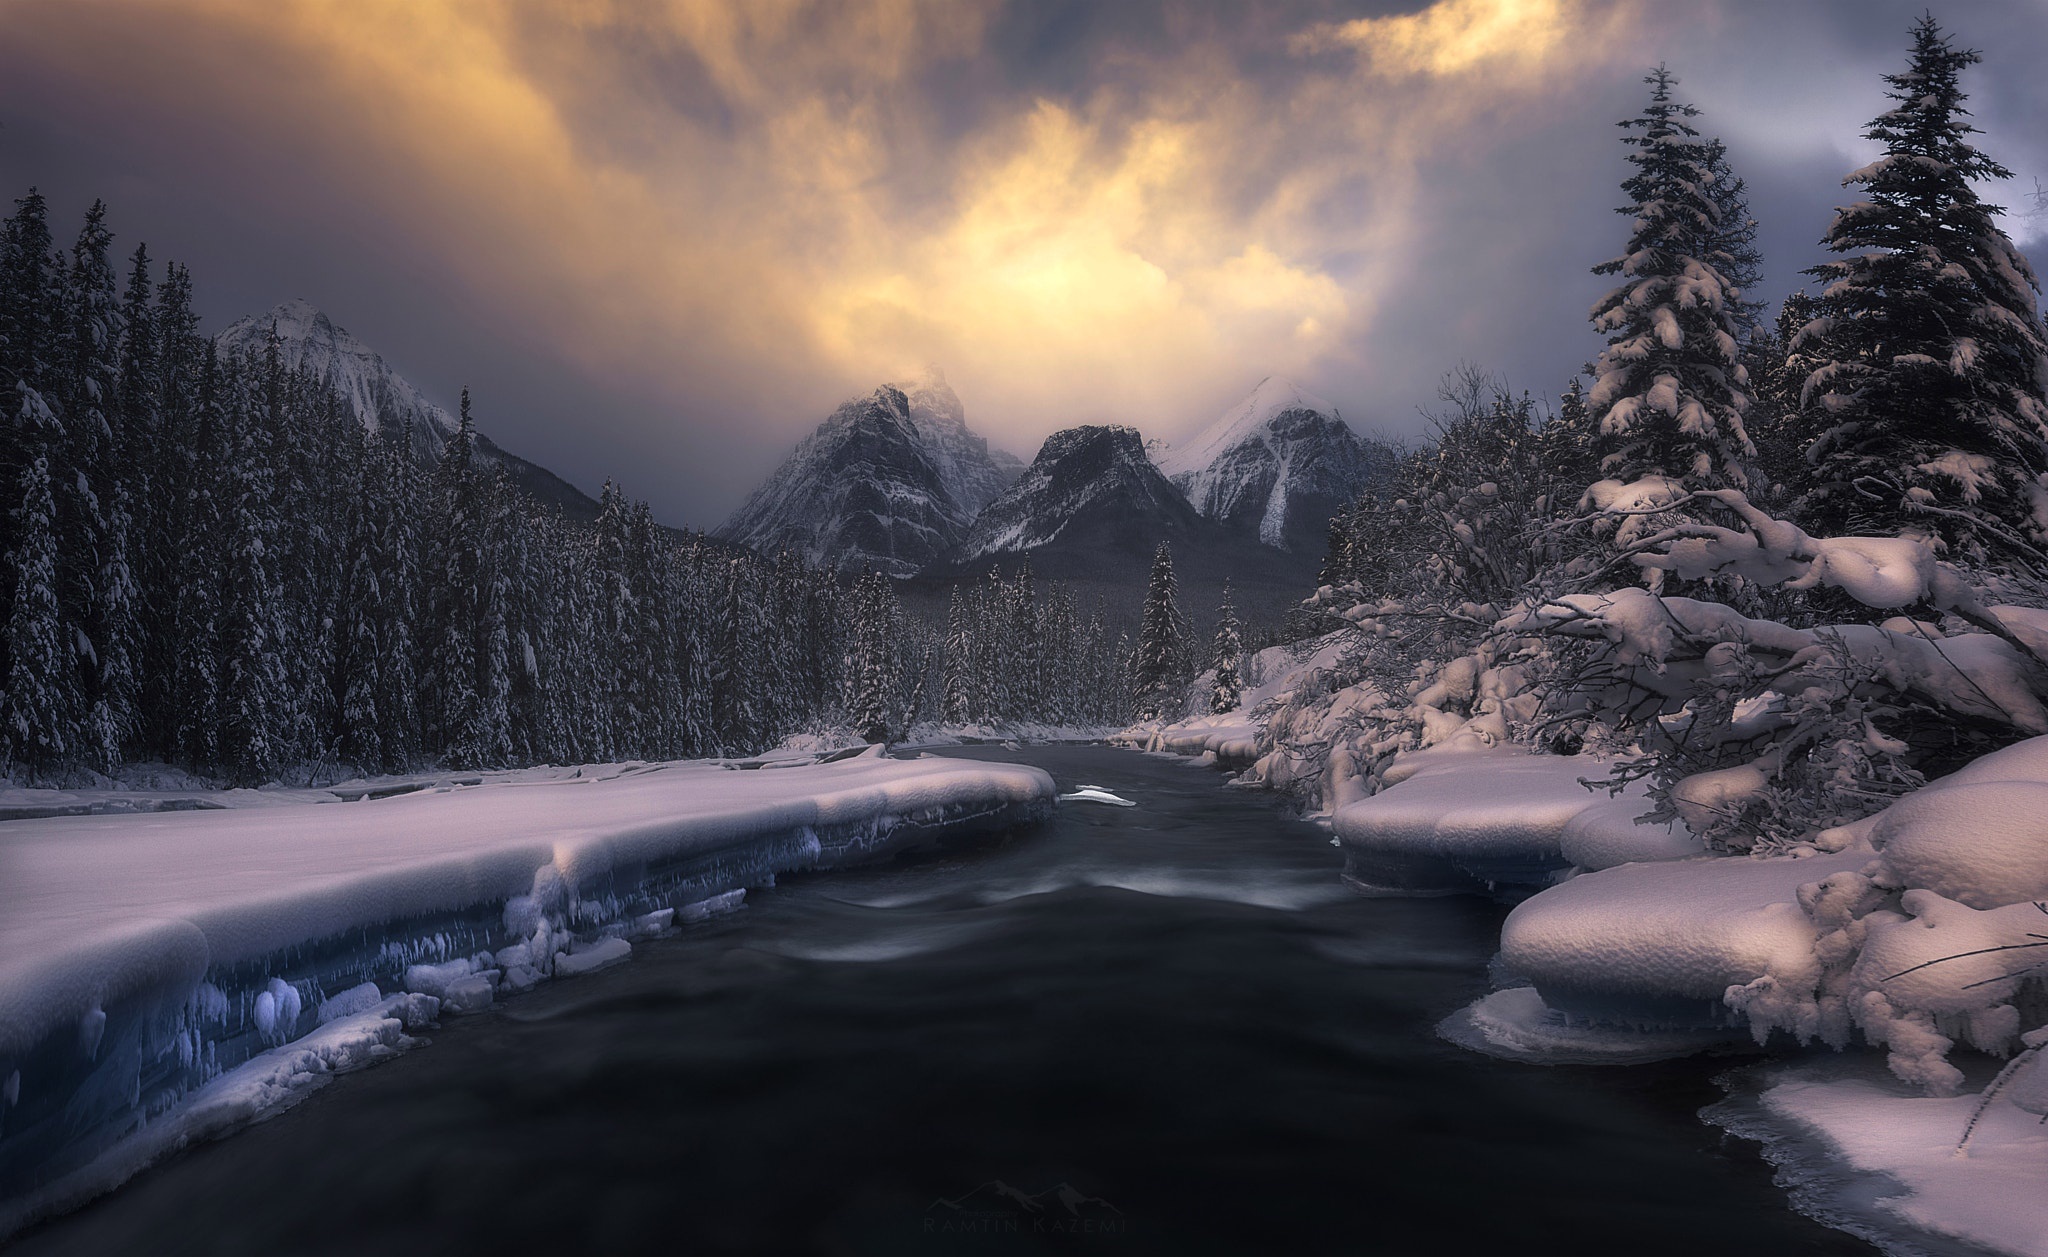 General 2048x1257 river cold snow nature sky mountains winter low light